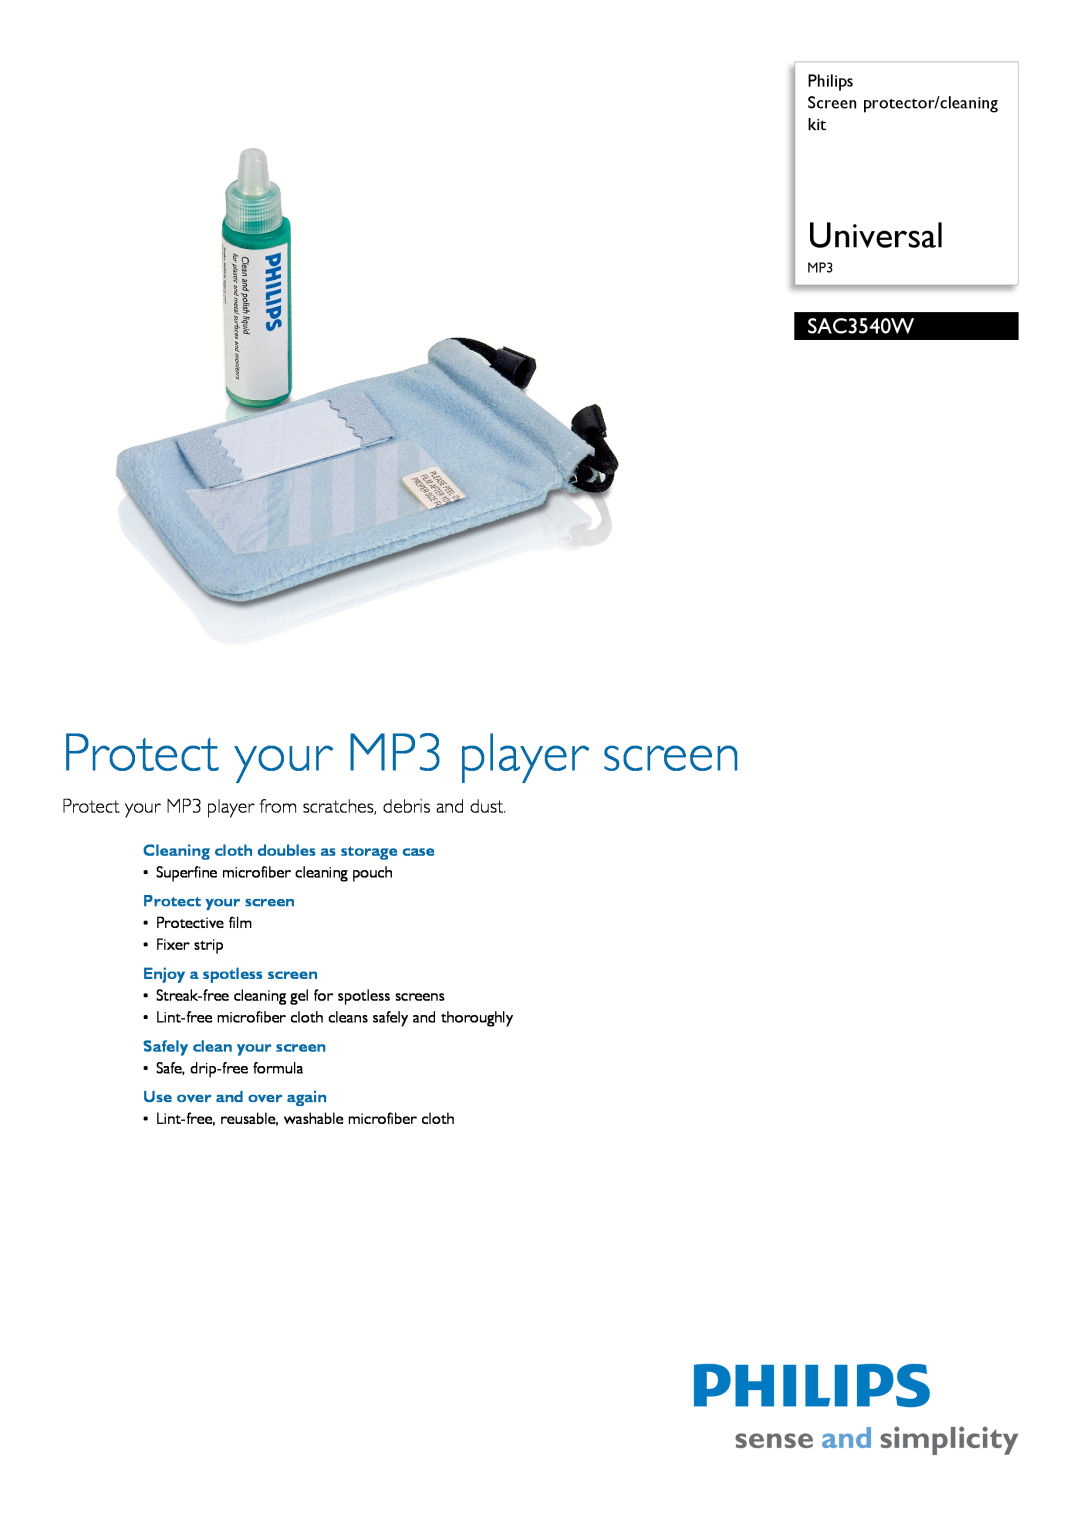 Philips SAC3540W manual Philips Screen protector/cleaning kit, Protect your MP3 player screen, Universal 